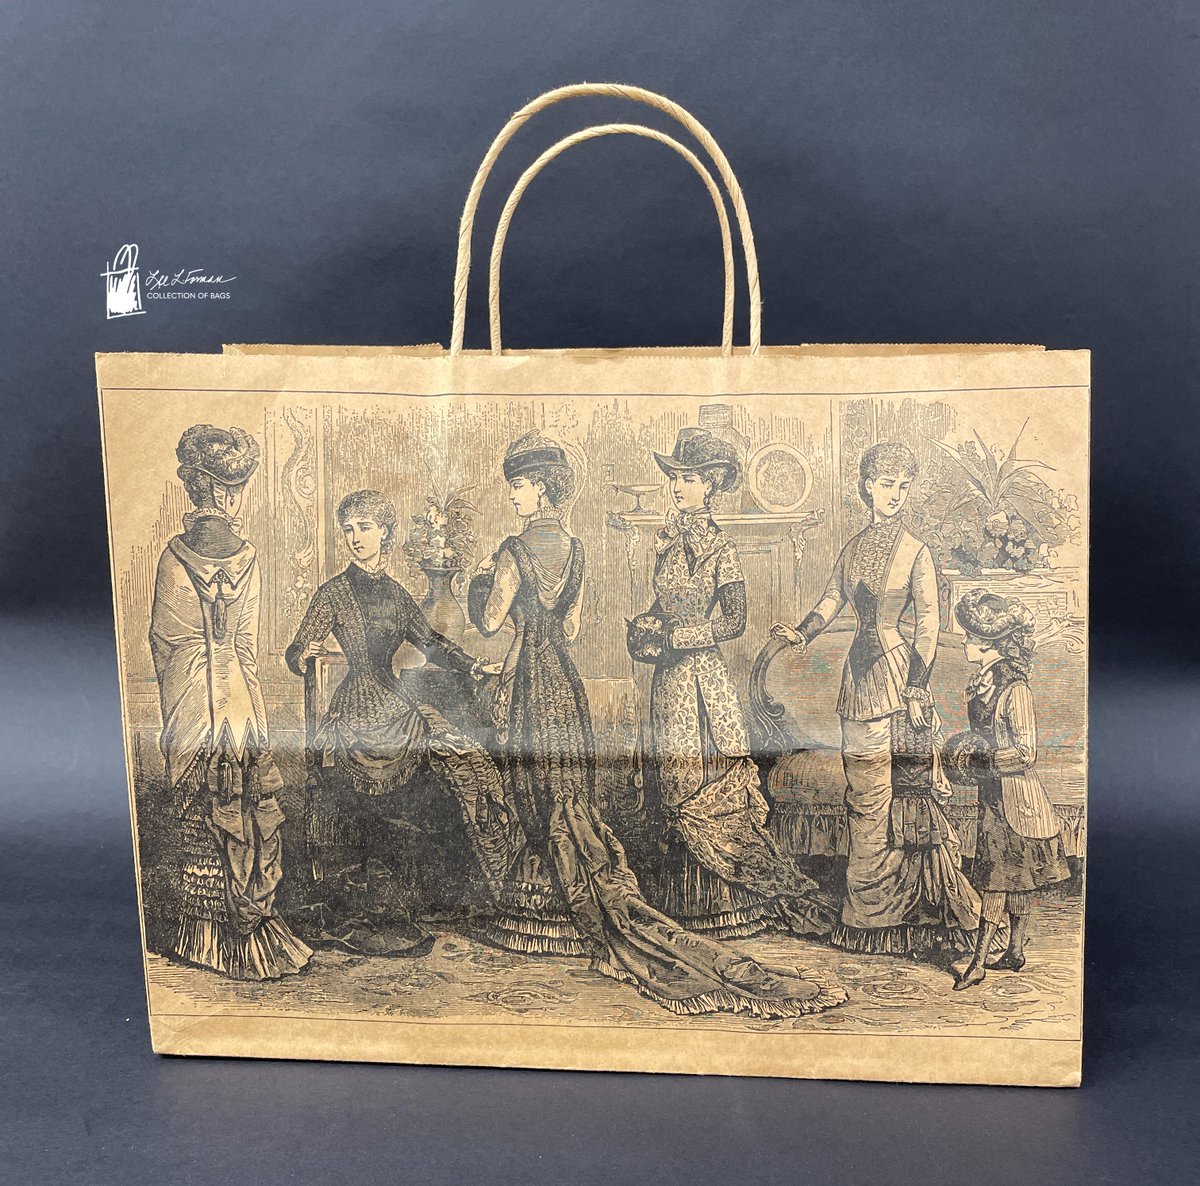 62/365: This contemporary paper bag features an historic fashion ad. The side panels provide close-ups and written descriptions of various types of winter bonnets featuring felt, plush, and velvet fabrics with feather accents.